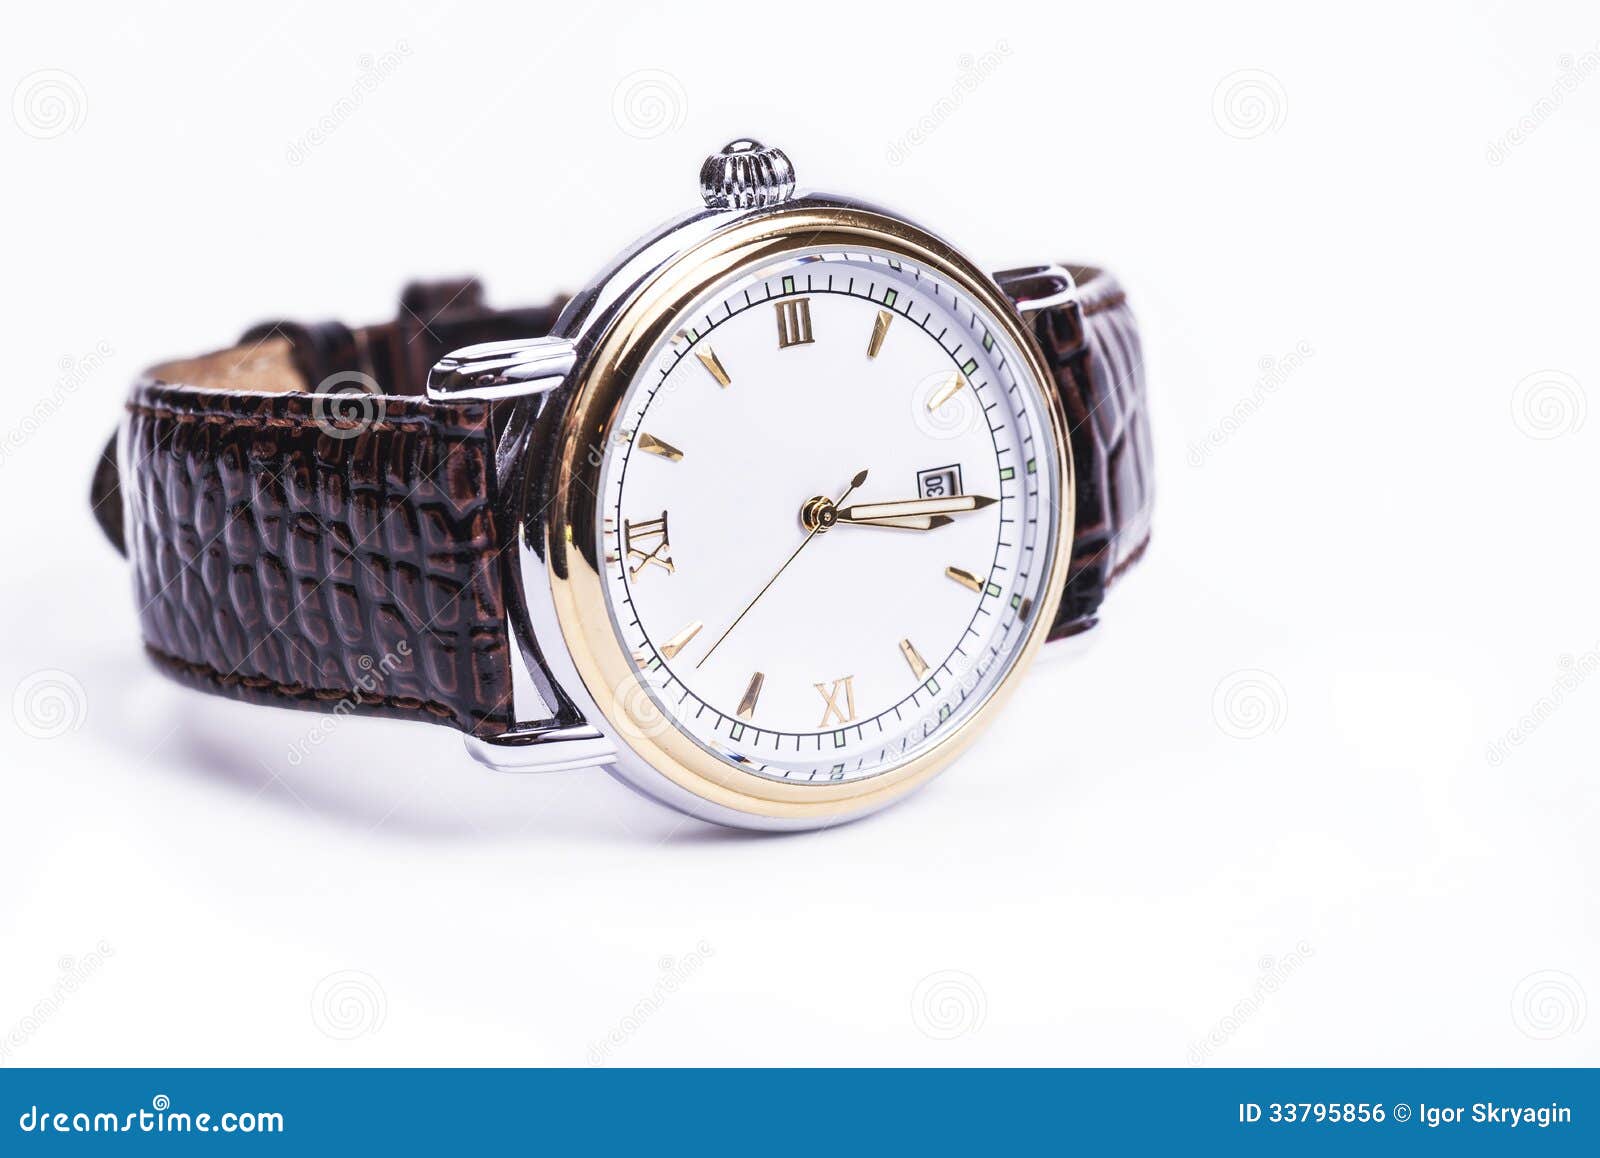 Watch with stock photo. Image of black, instrument, watch - 33795856